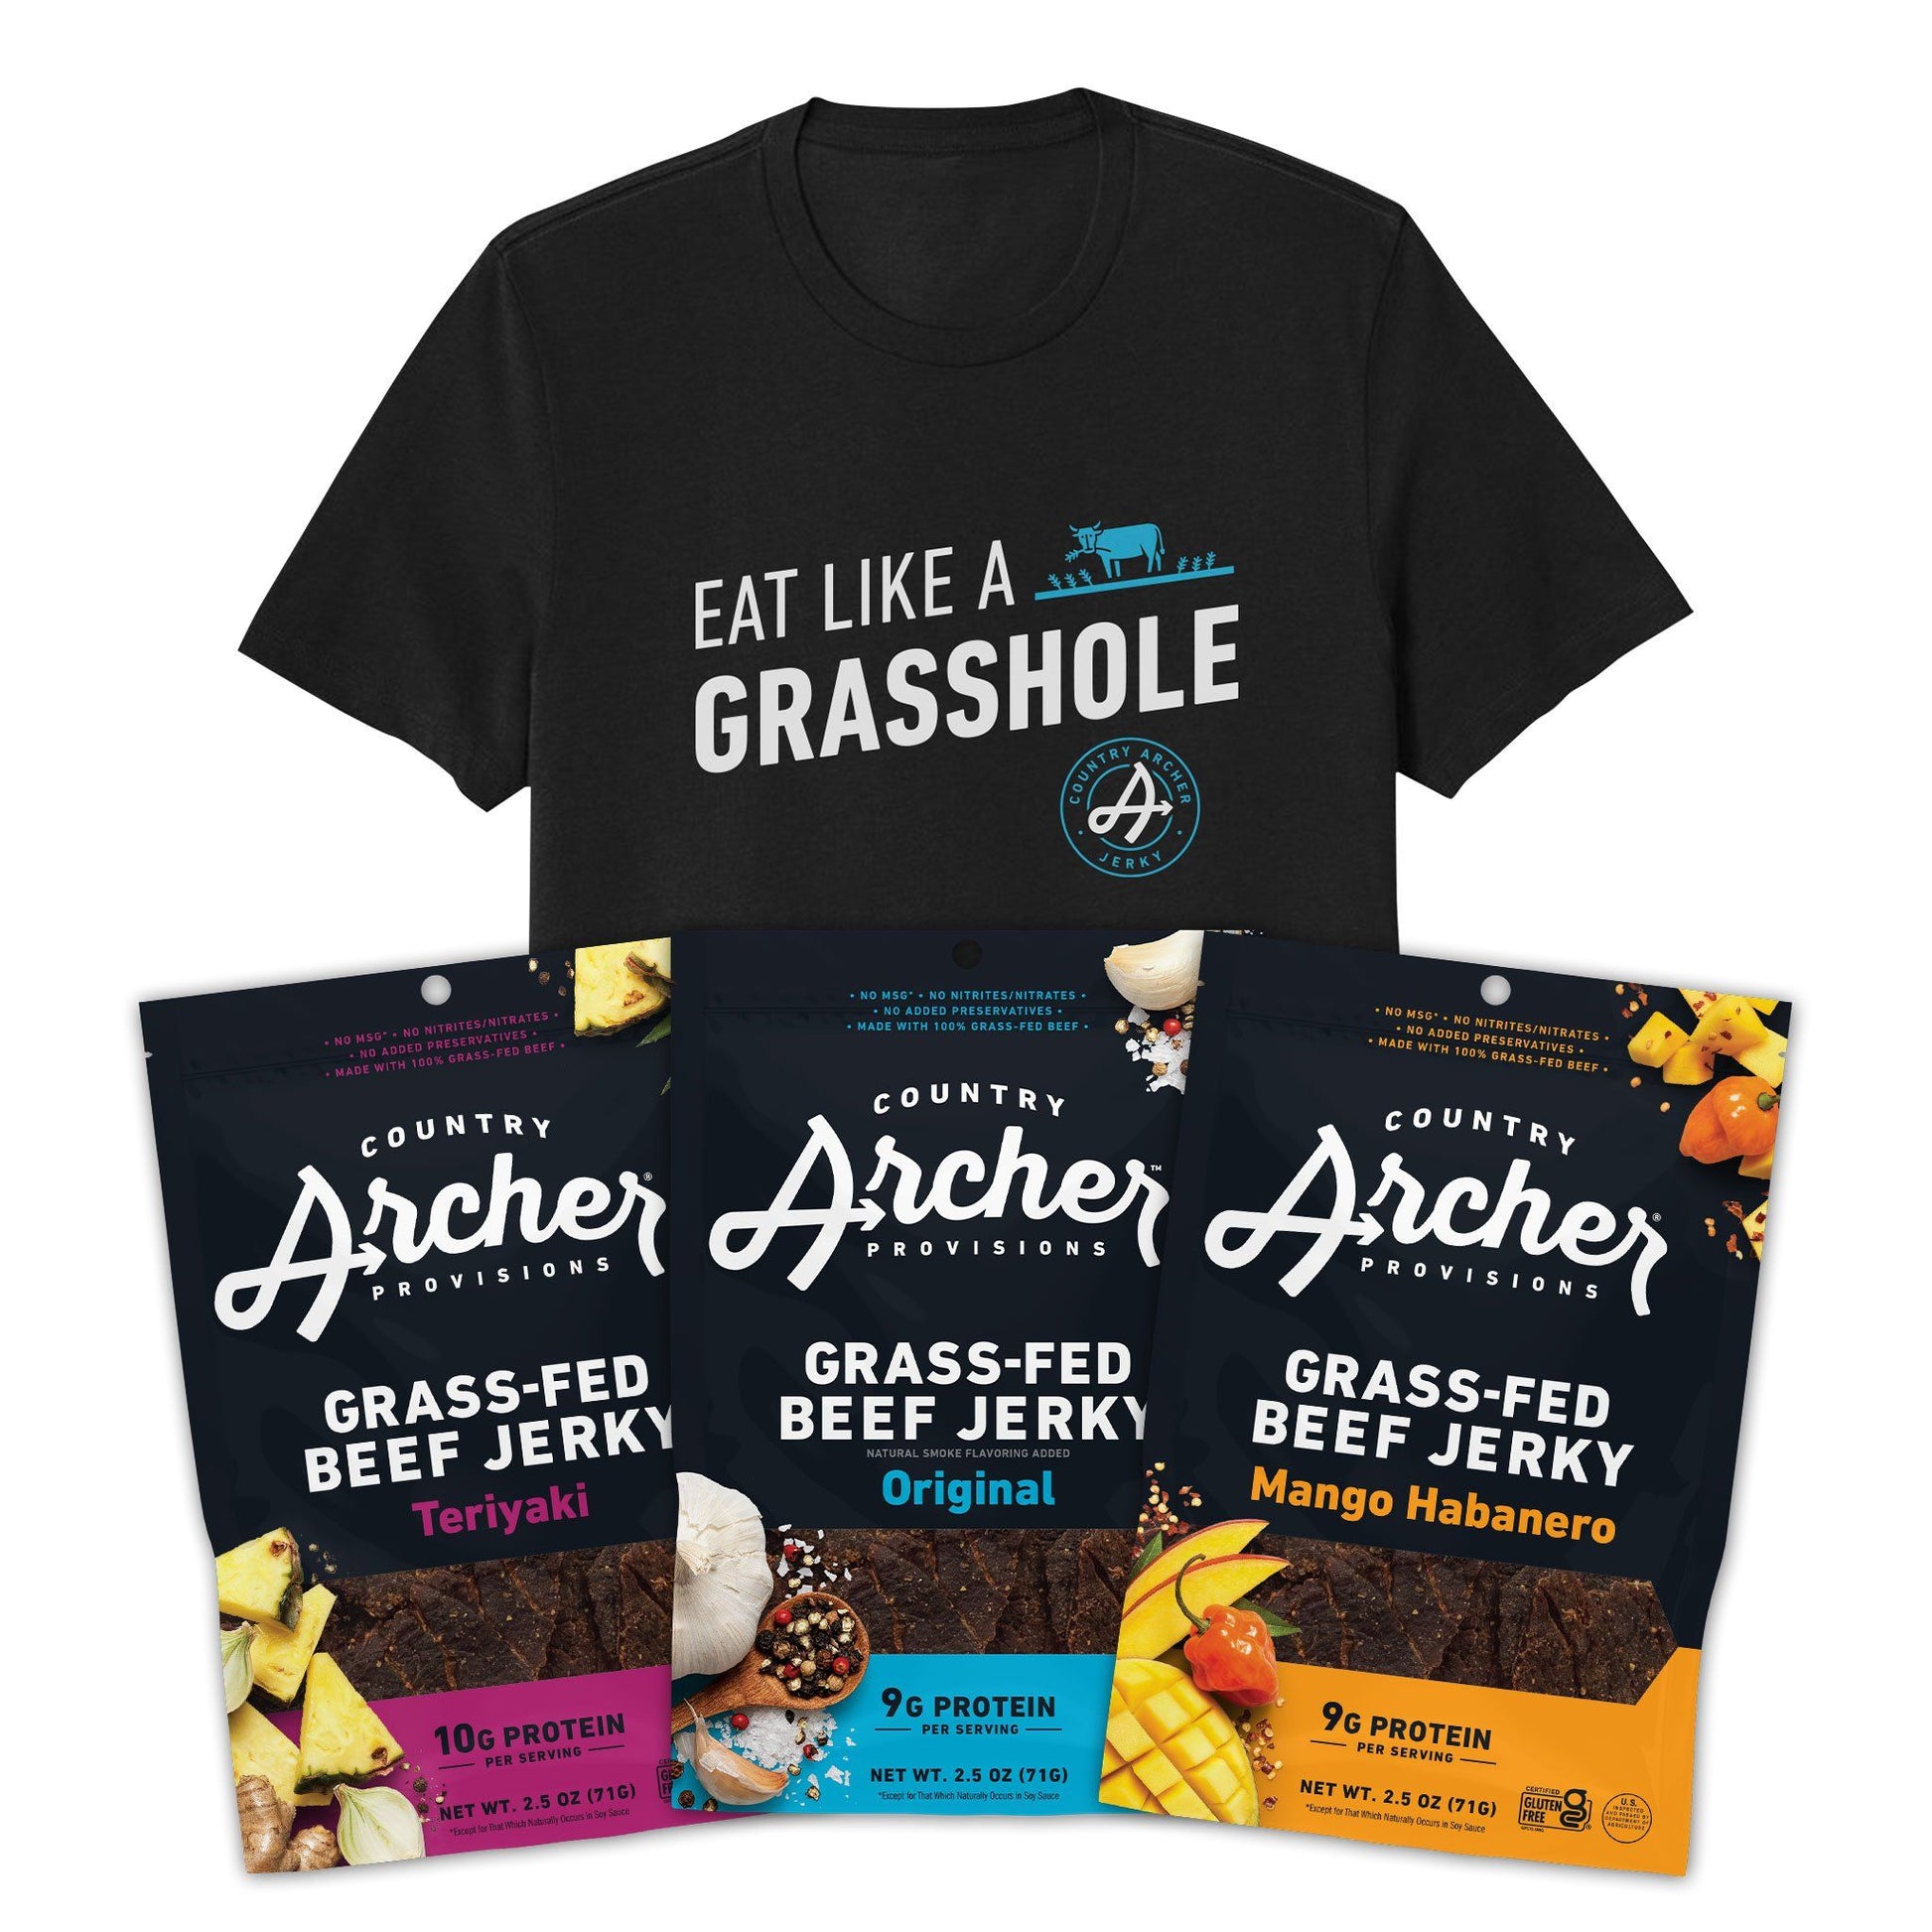  Grass-fed Beef Jerky Starter Gift Pack by Country Archer, Pack with 2X-Large Unisex T-Shirt, g, grass-fed-beef-jerky-starter-gift-pack, , Pack with 2X-Large Unisex T-Shirt